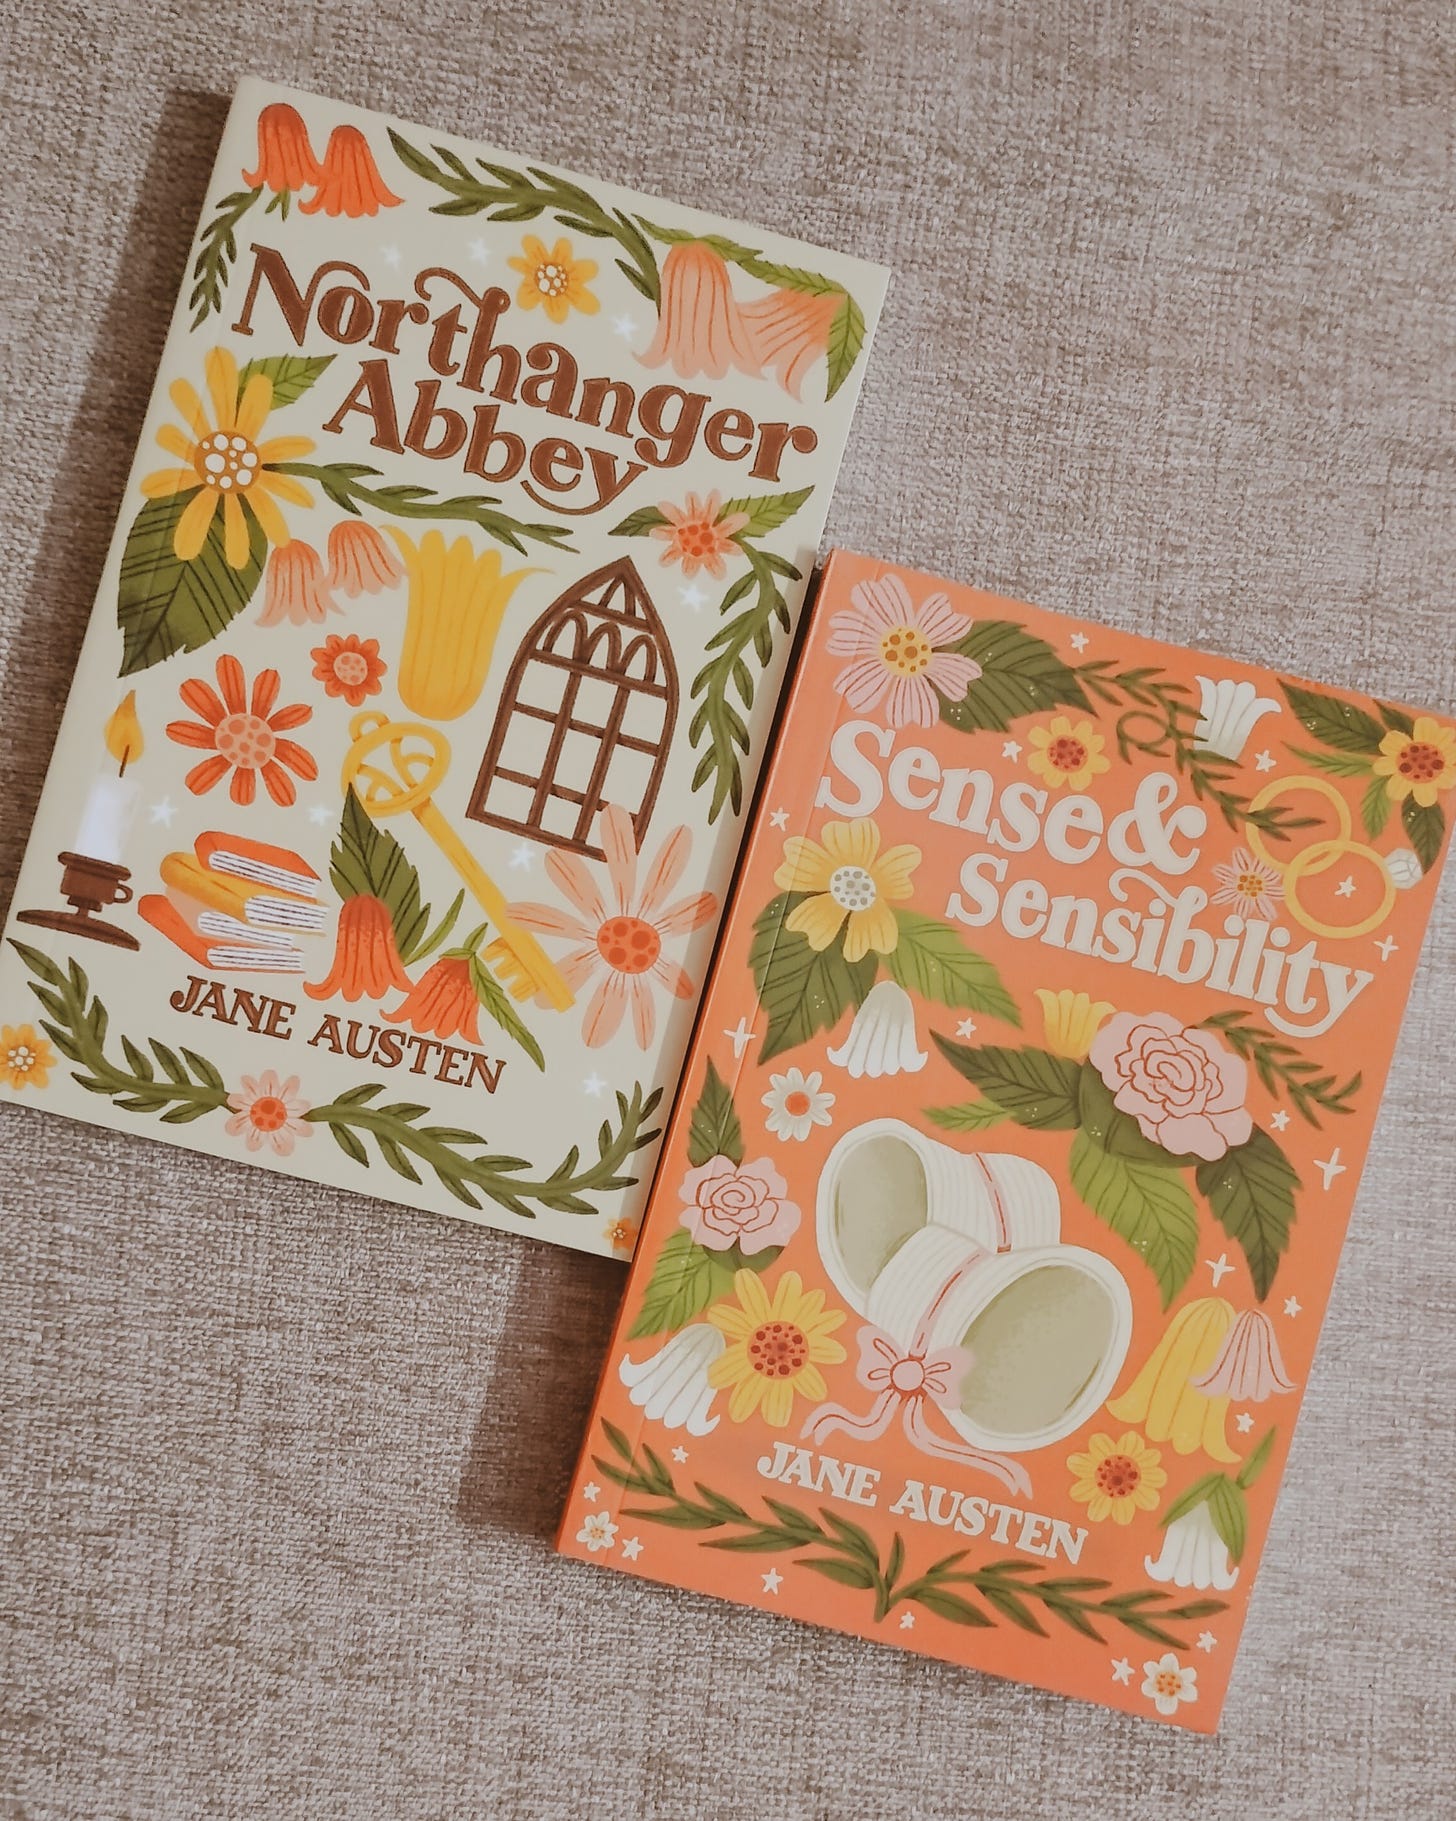 Northanger Abbey and Sense And Sensibility by Jane Austen 